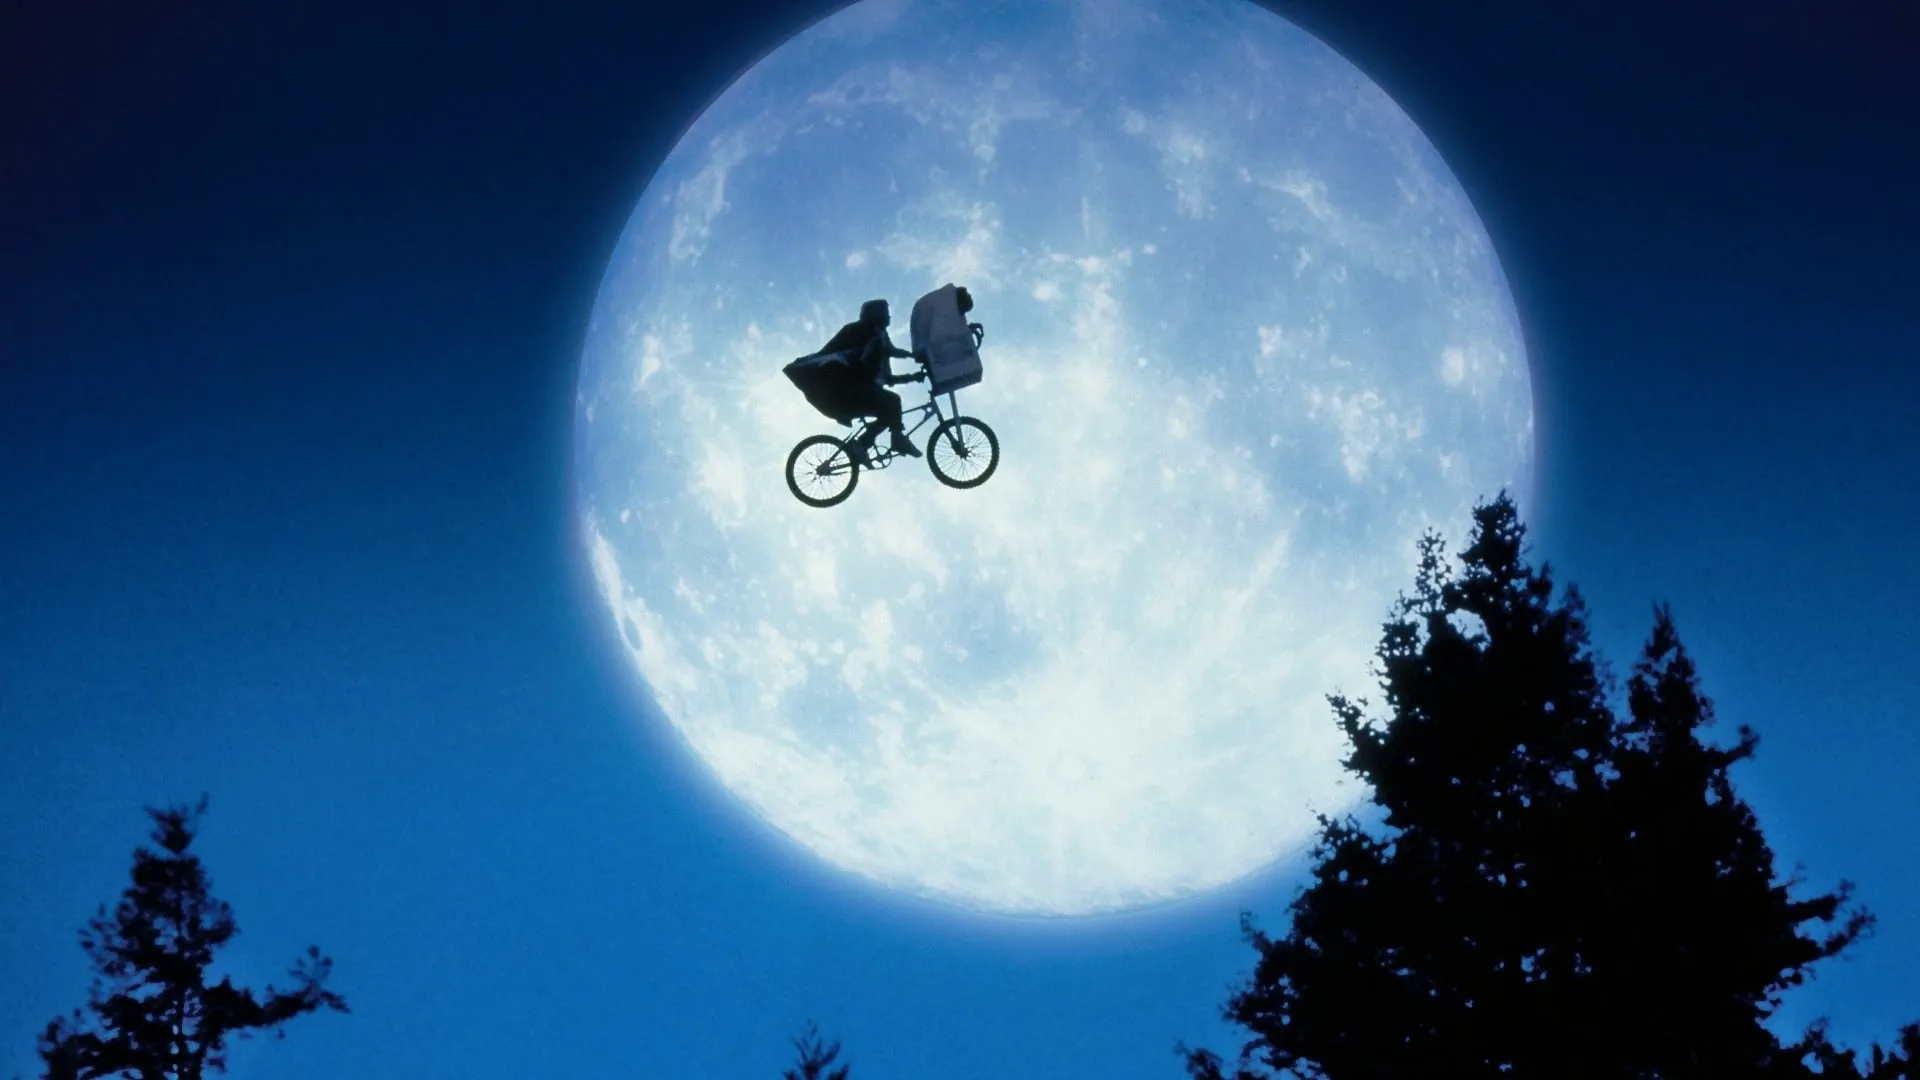 E.T. - The Extra-Terrestrial